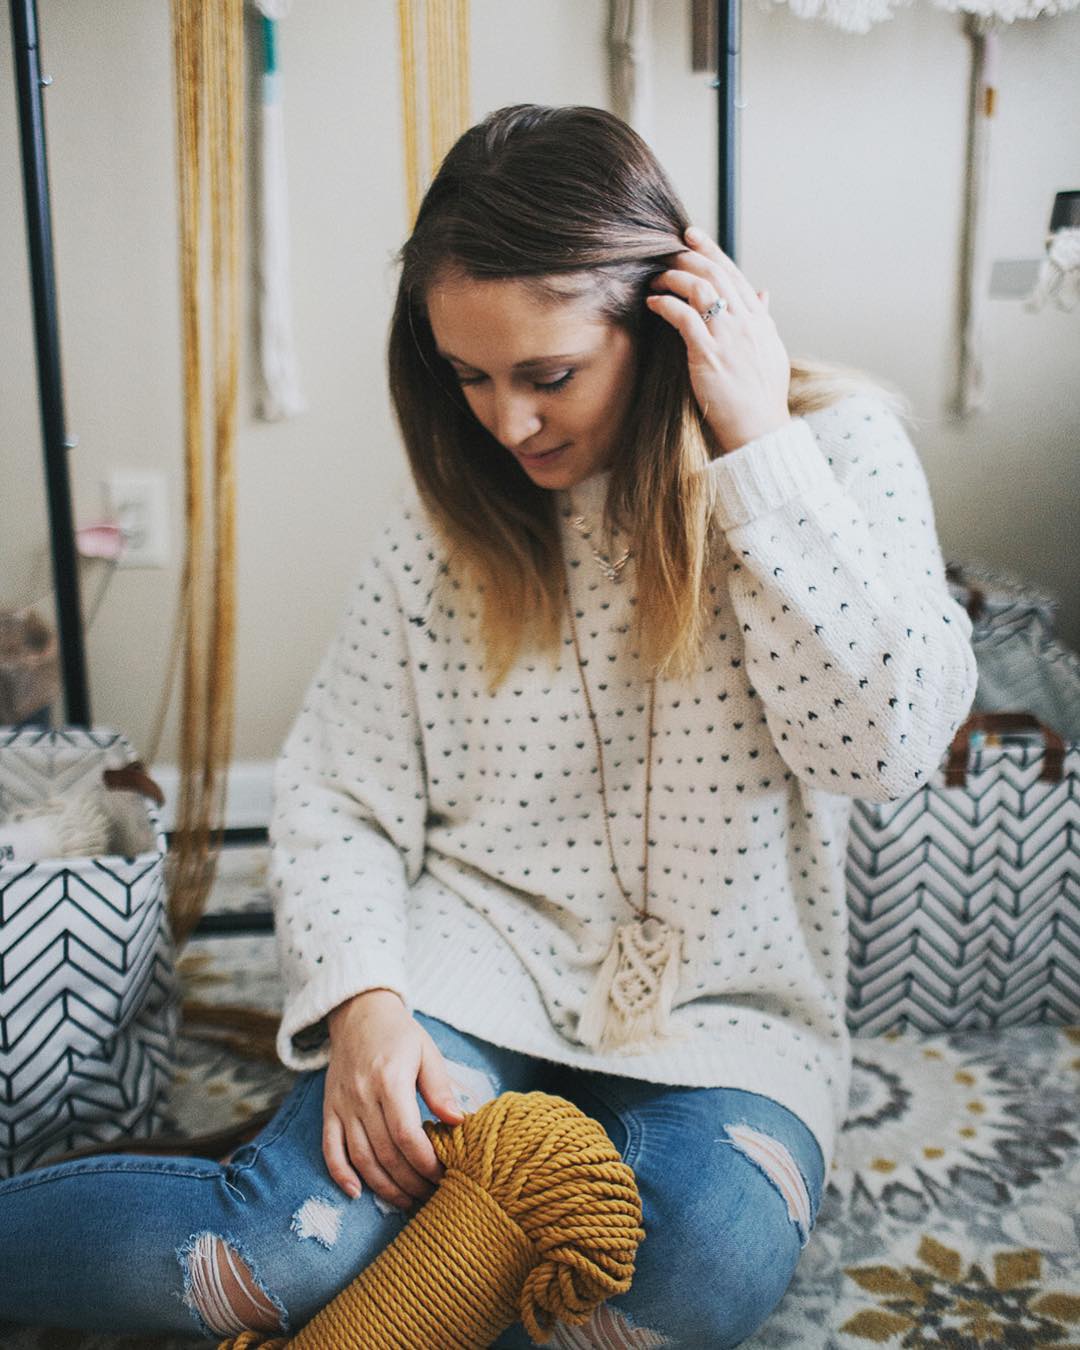 Woman sitting with totes of yarn. Photo by Instagram user @deserthomestudio